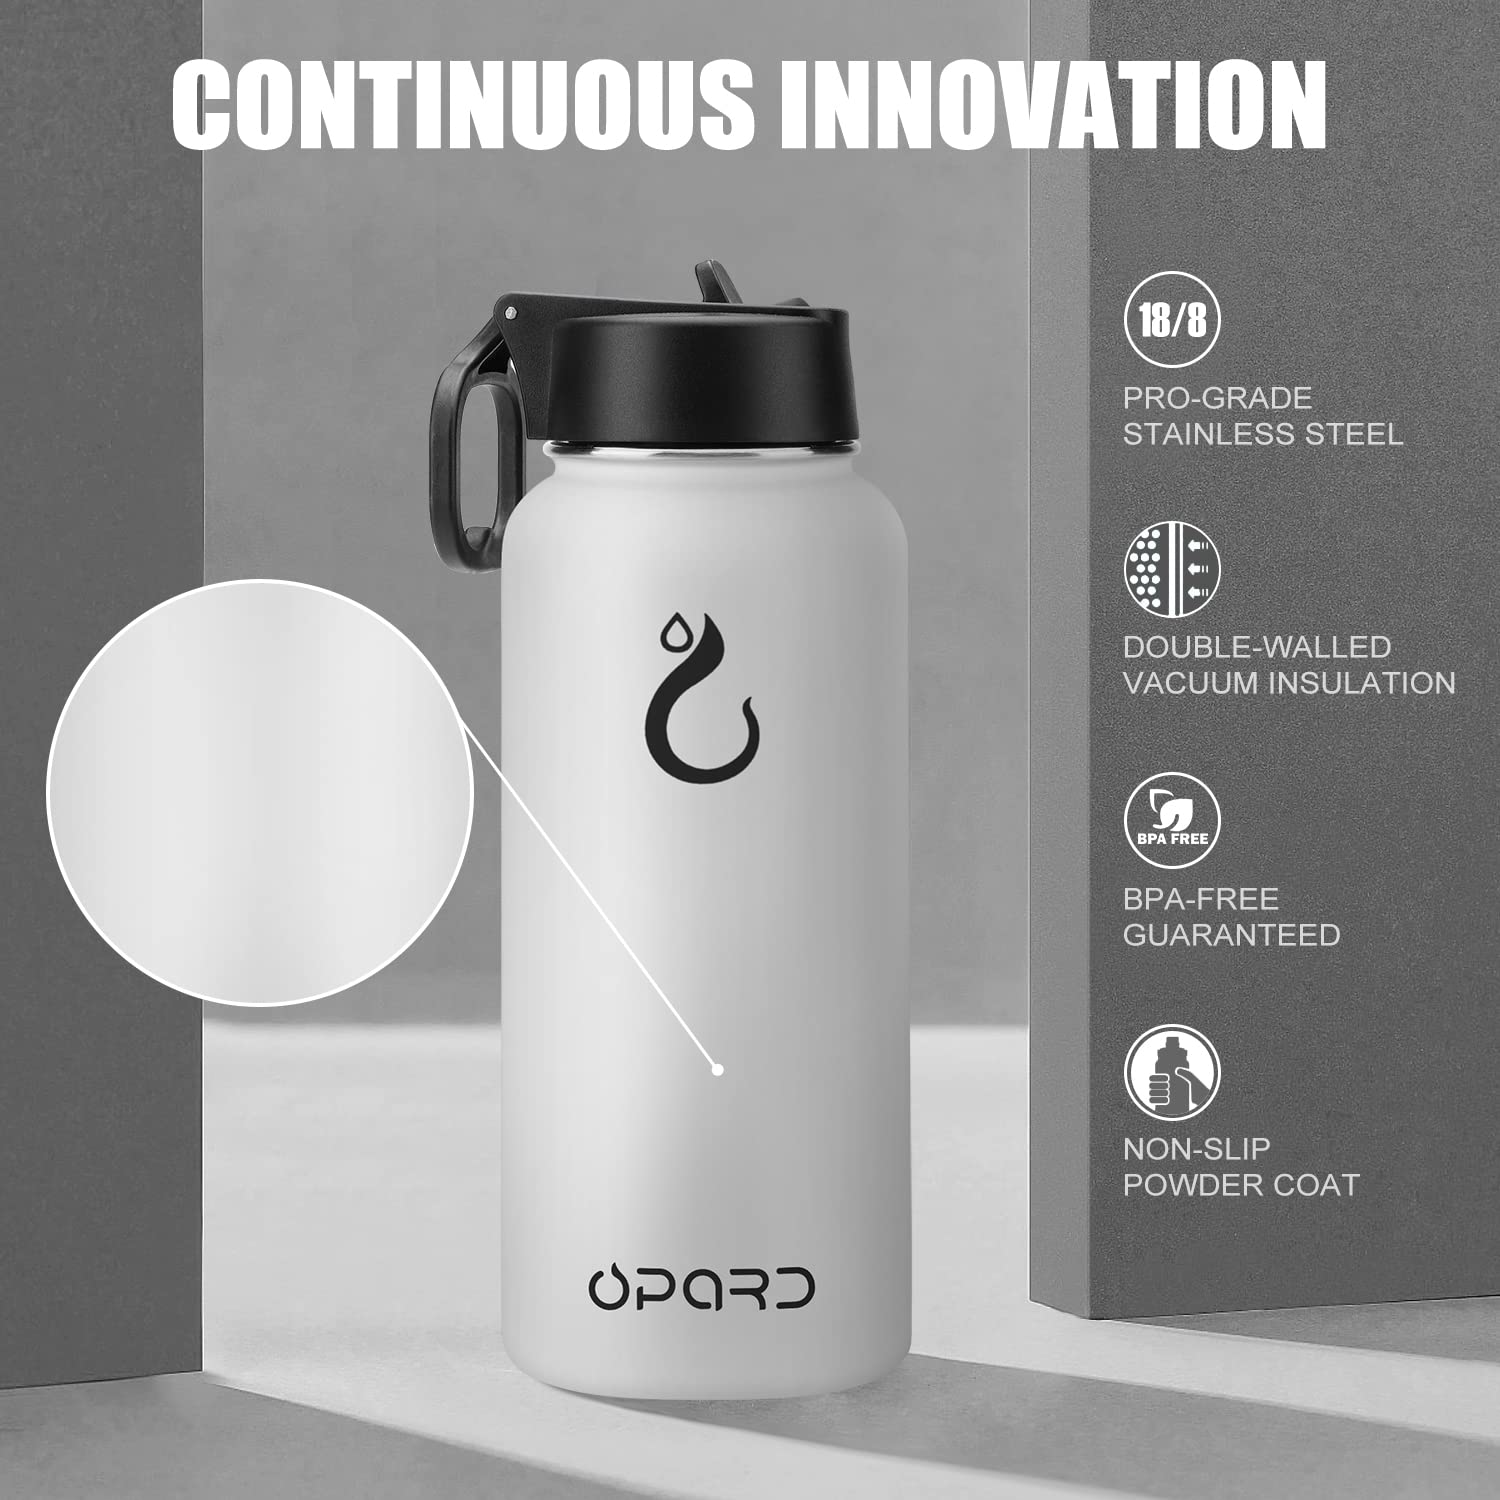 Opard Stainless Steel Water Bottle, 32 oz Vacuum Insulated Double Walled Leak Proof Sports Water Bottle with Straw for Gym Travel Camping